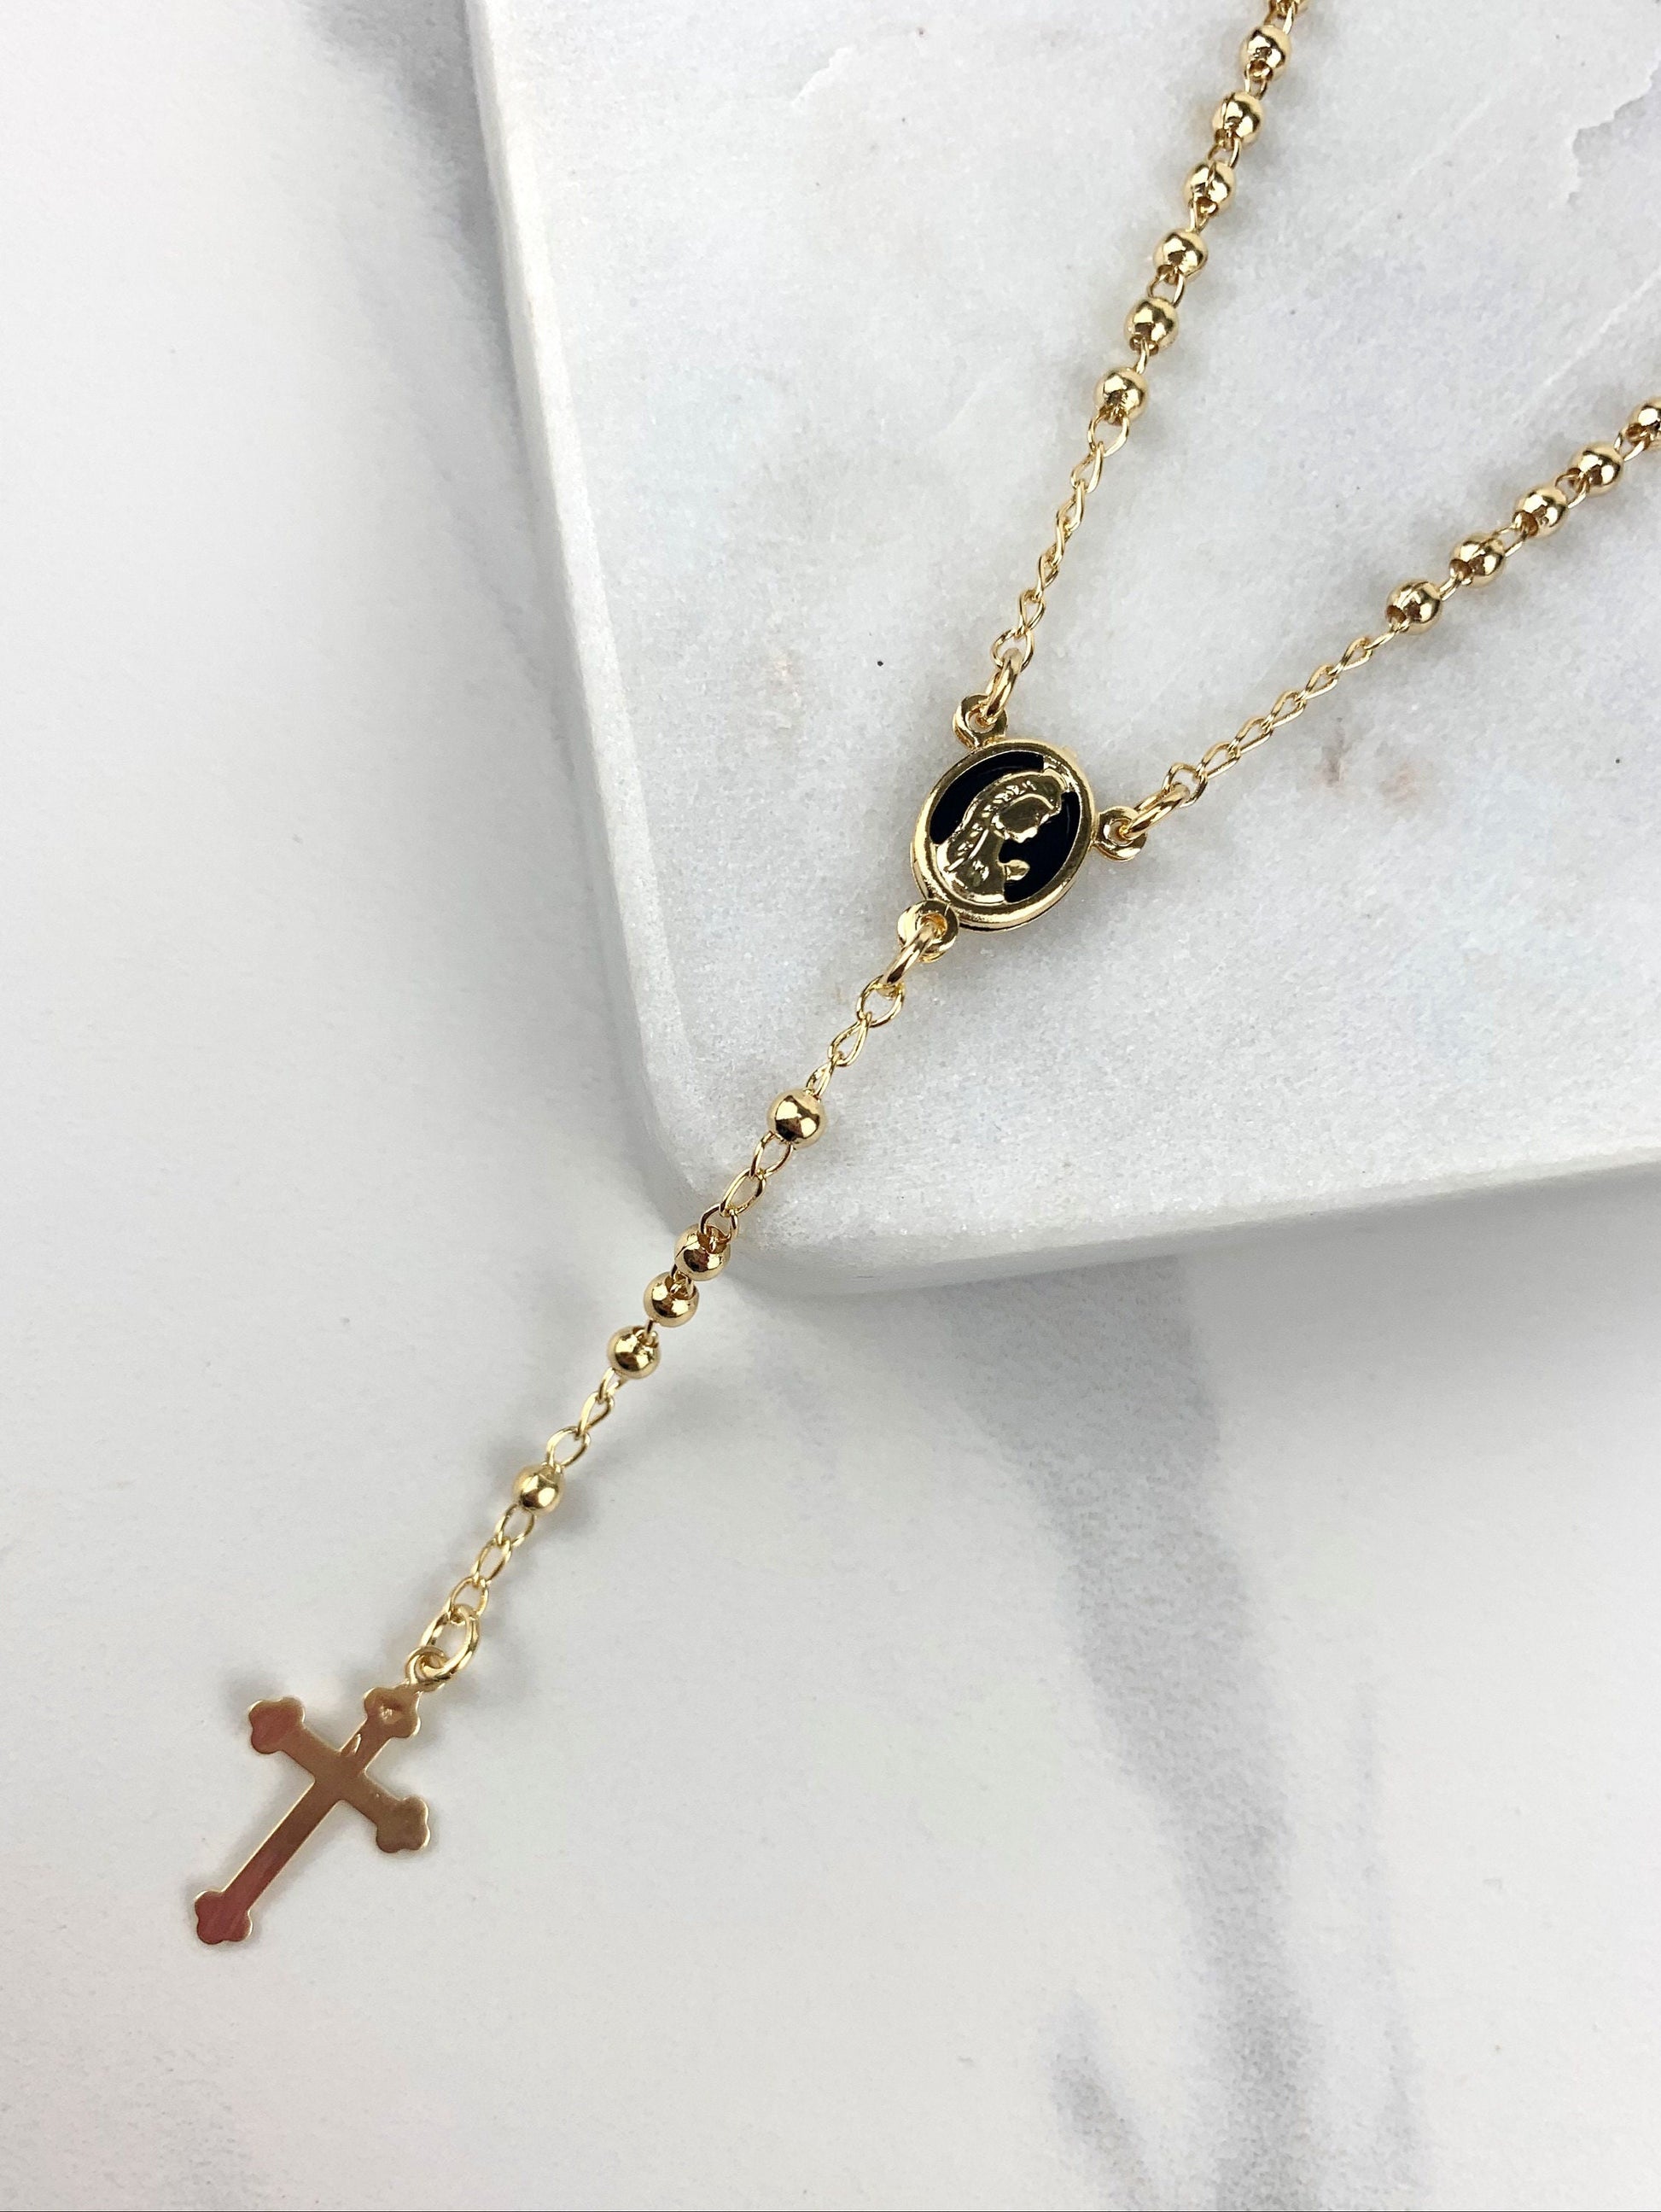 18k Gold Filled Beaded Chain Virgin Mary, Ave Maria Rosary Necklace, Religious Jewelry, Wholesale Jewelry Making Supplies